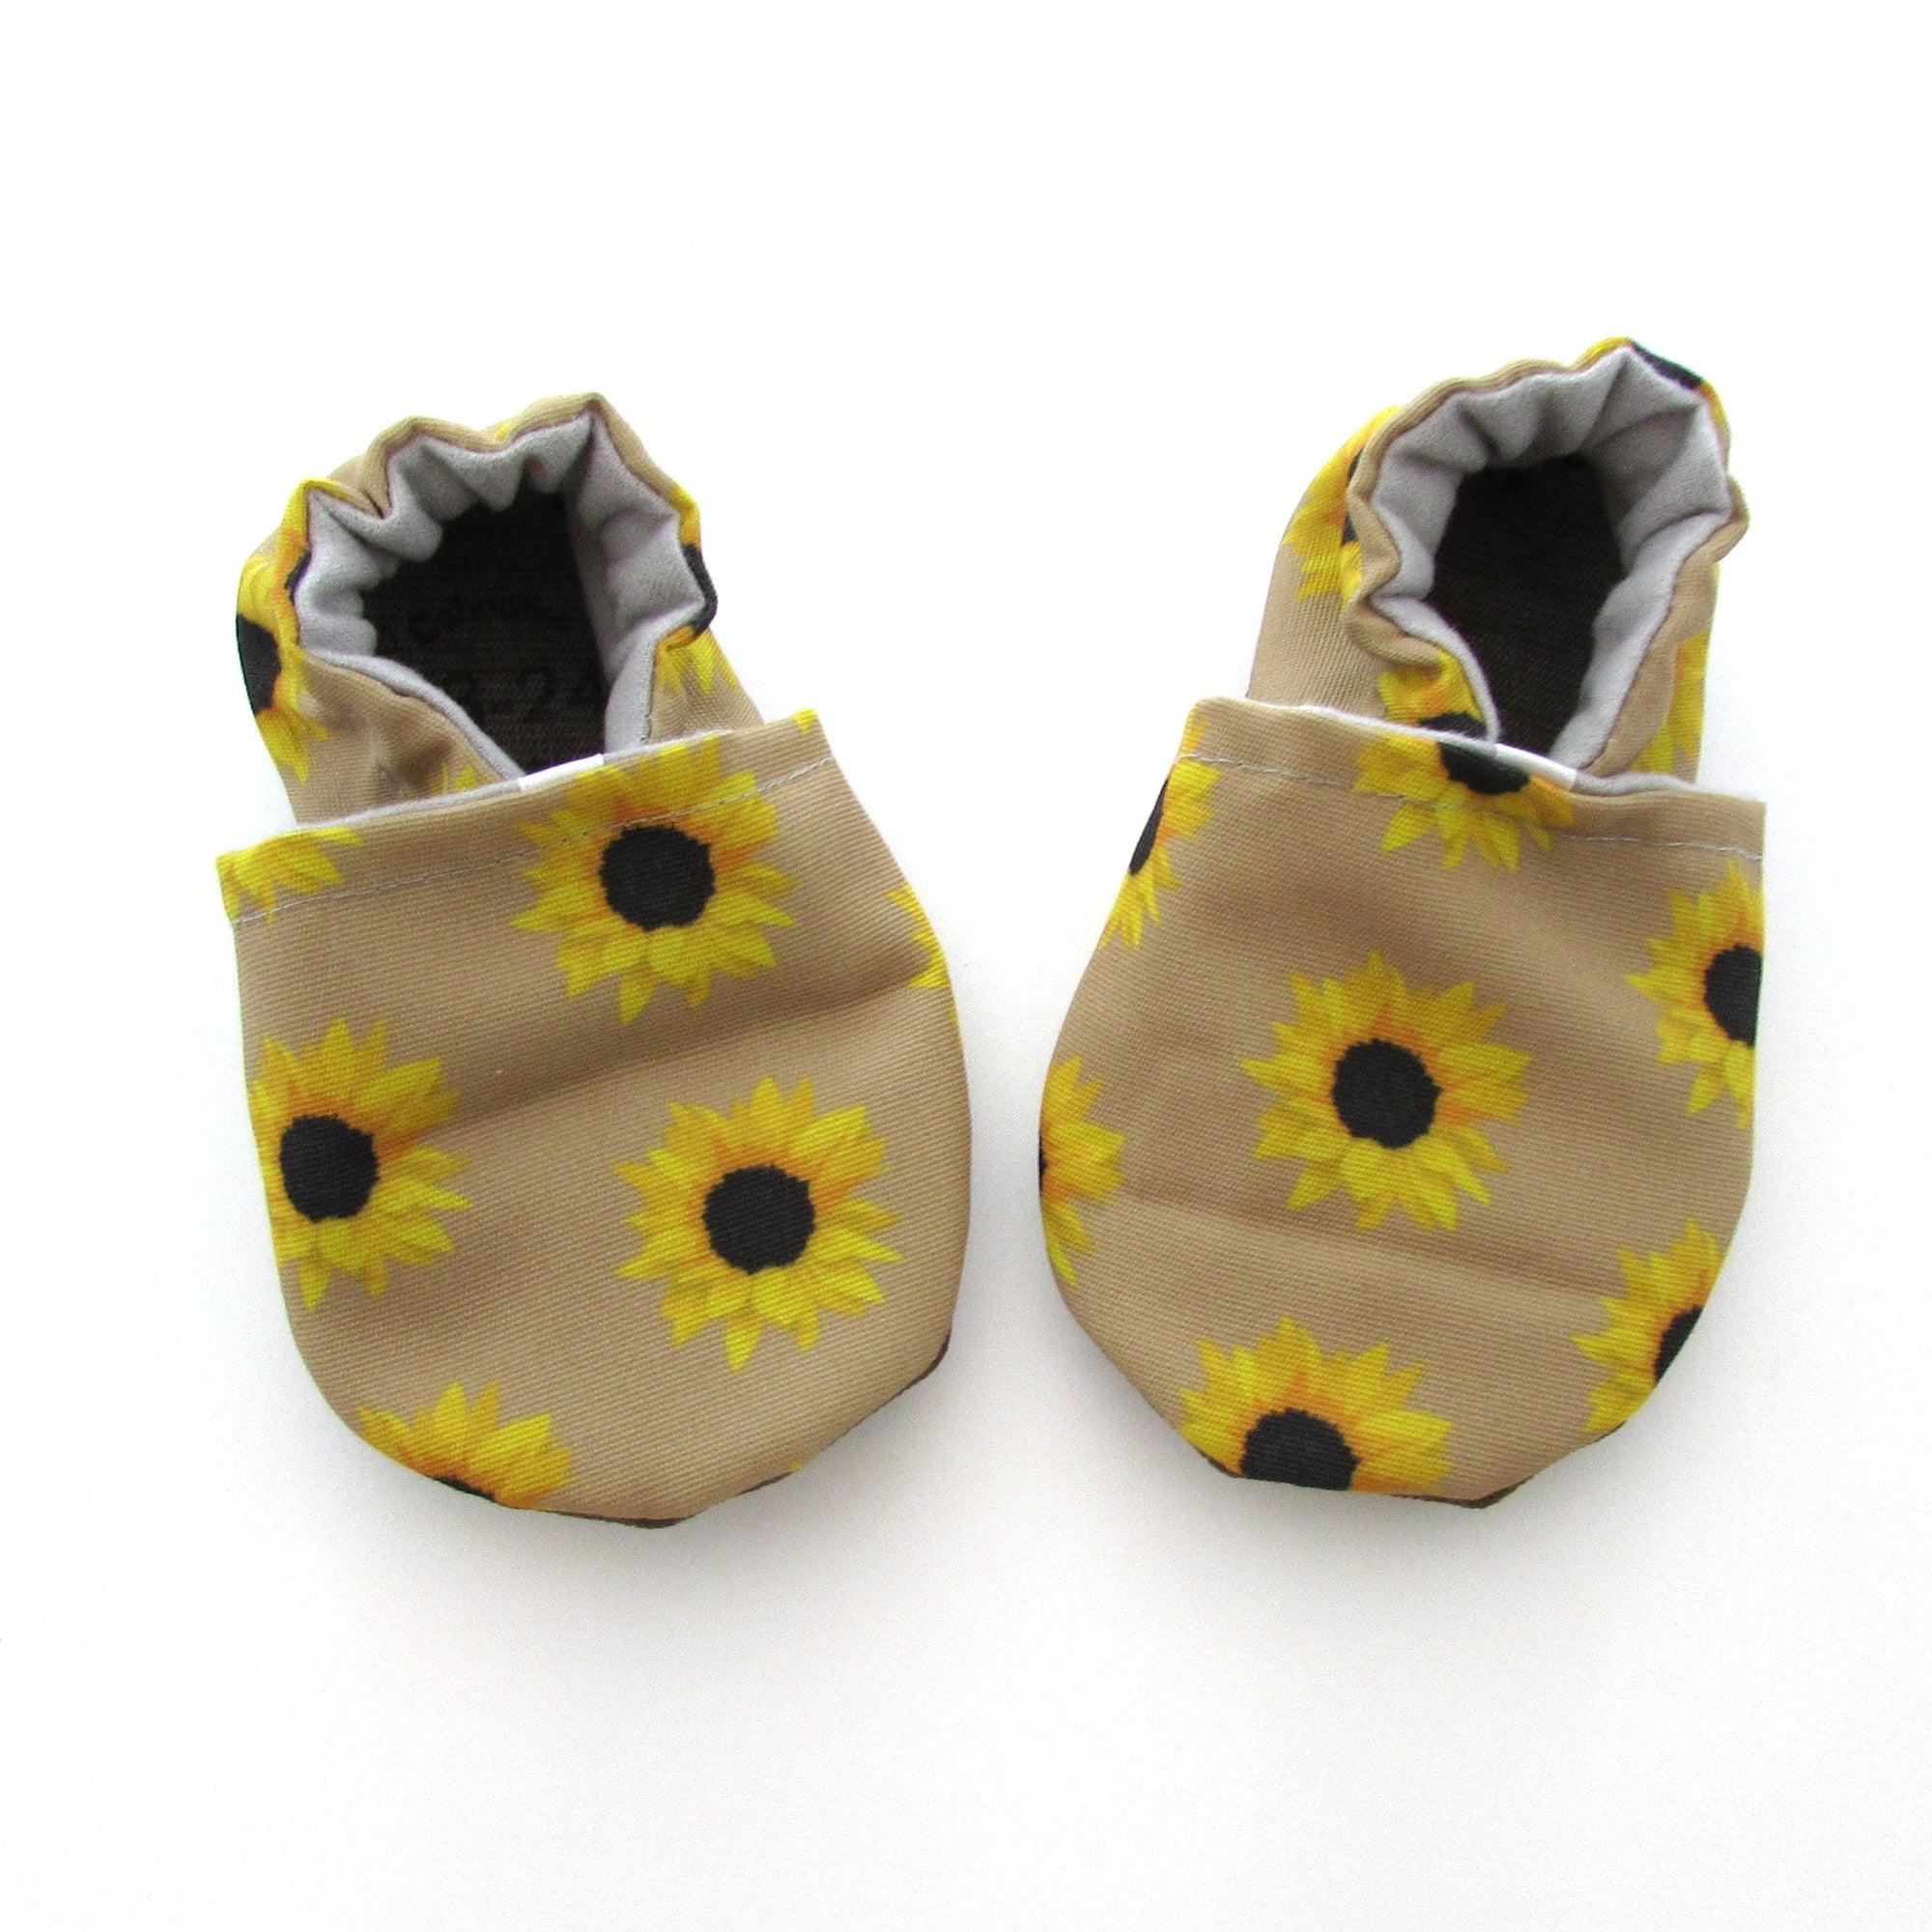 soft sole baby shoes